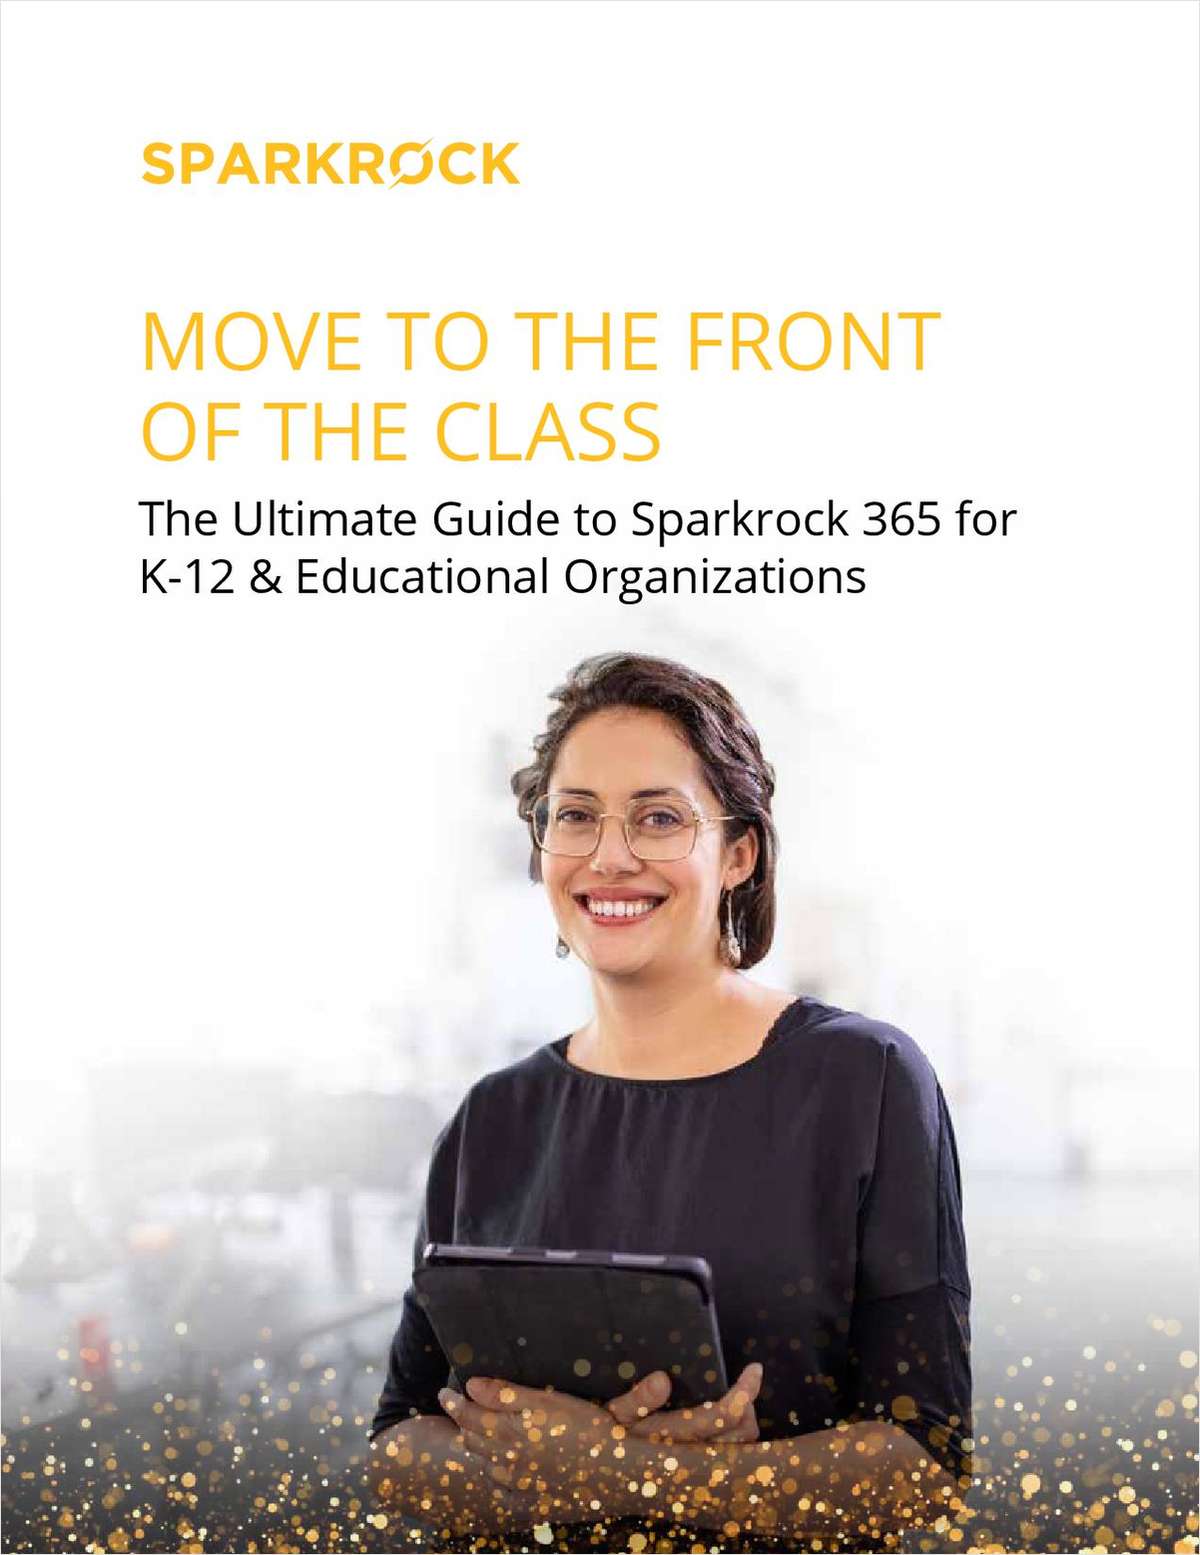 MOVE TO THE FRONT OF THE CLASS